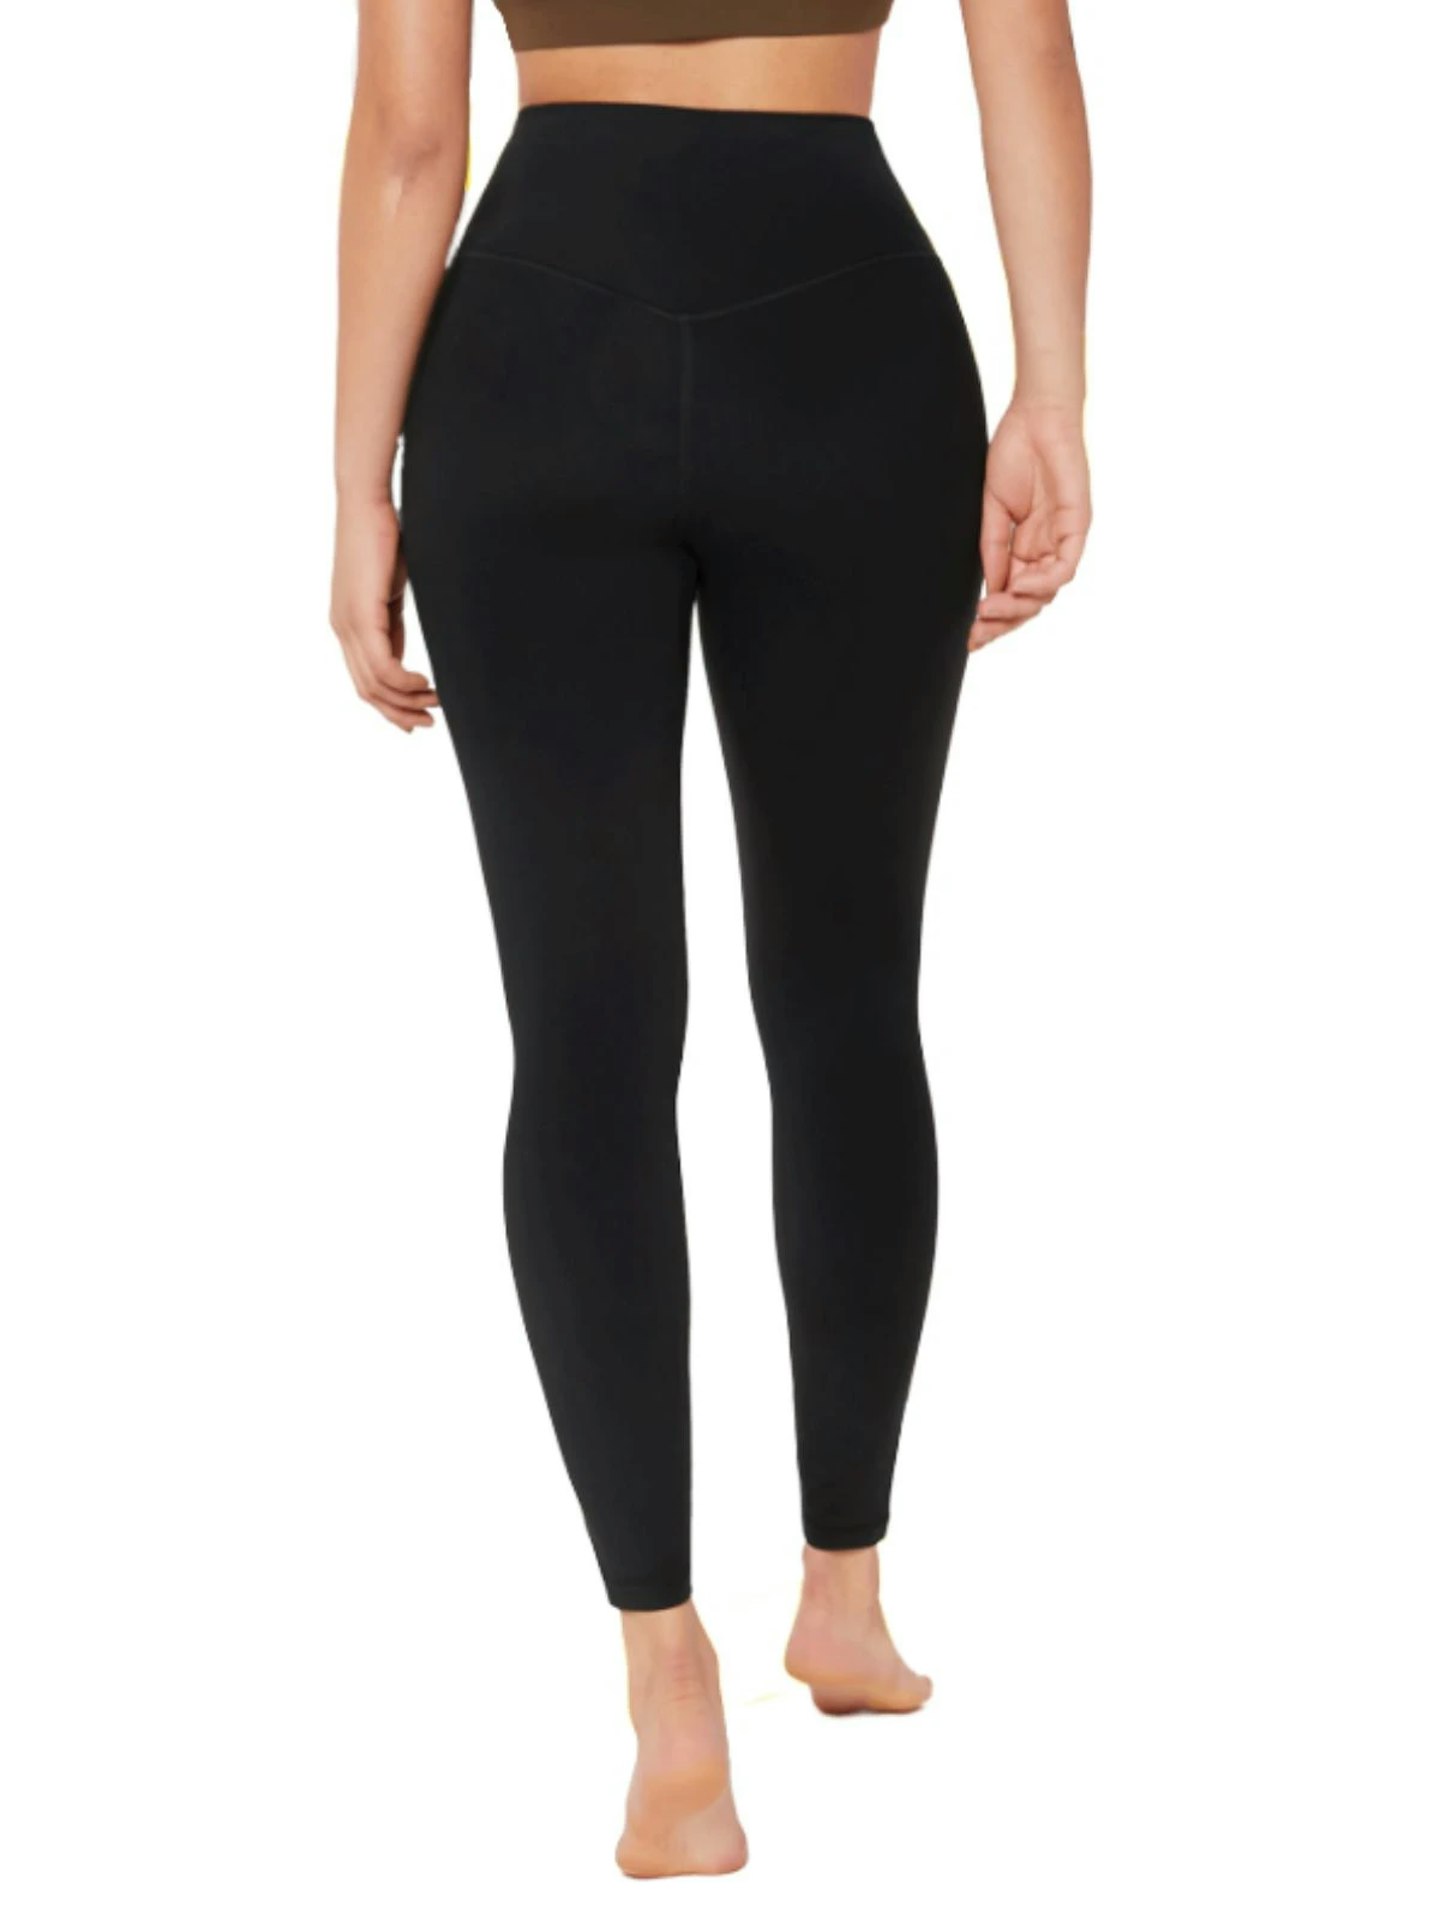 Best Lululemon dupes = @SHEIN Glow Mode leggings! Buttery soft and